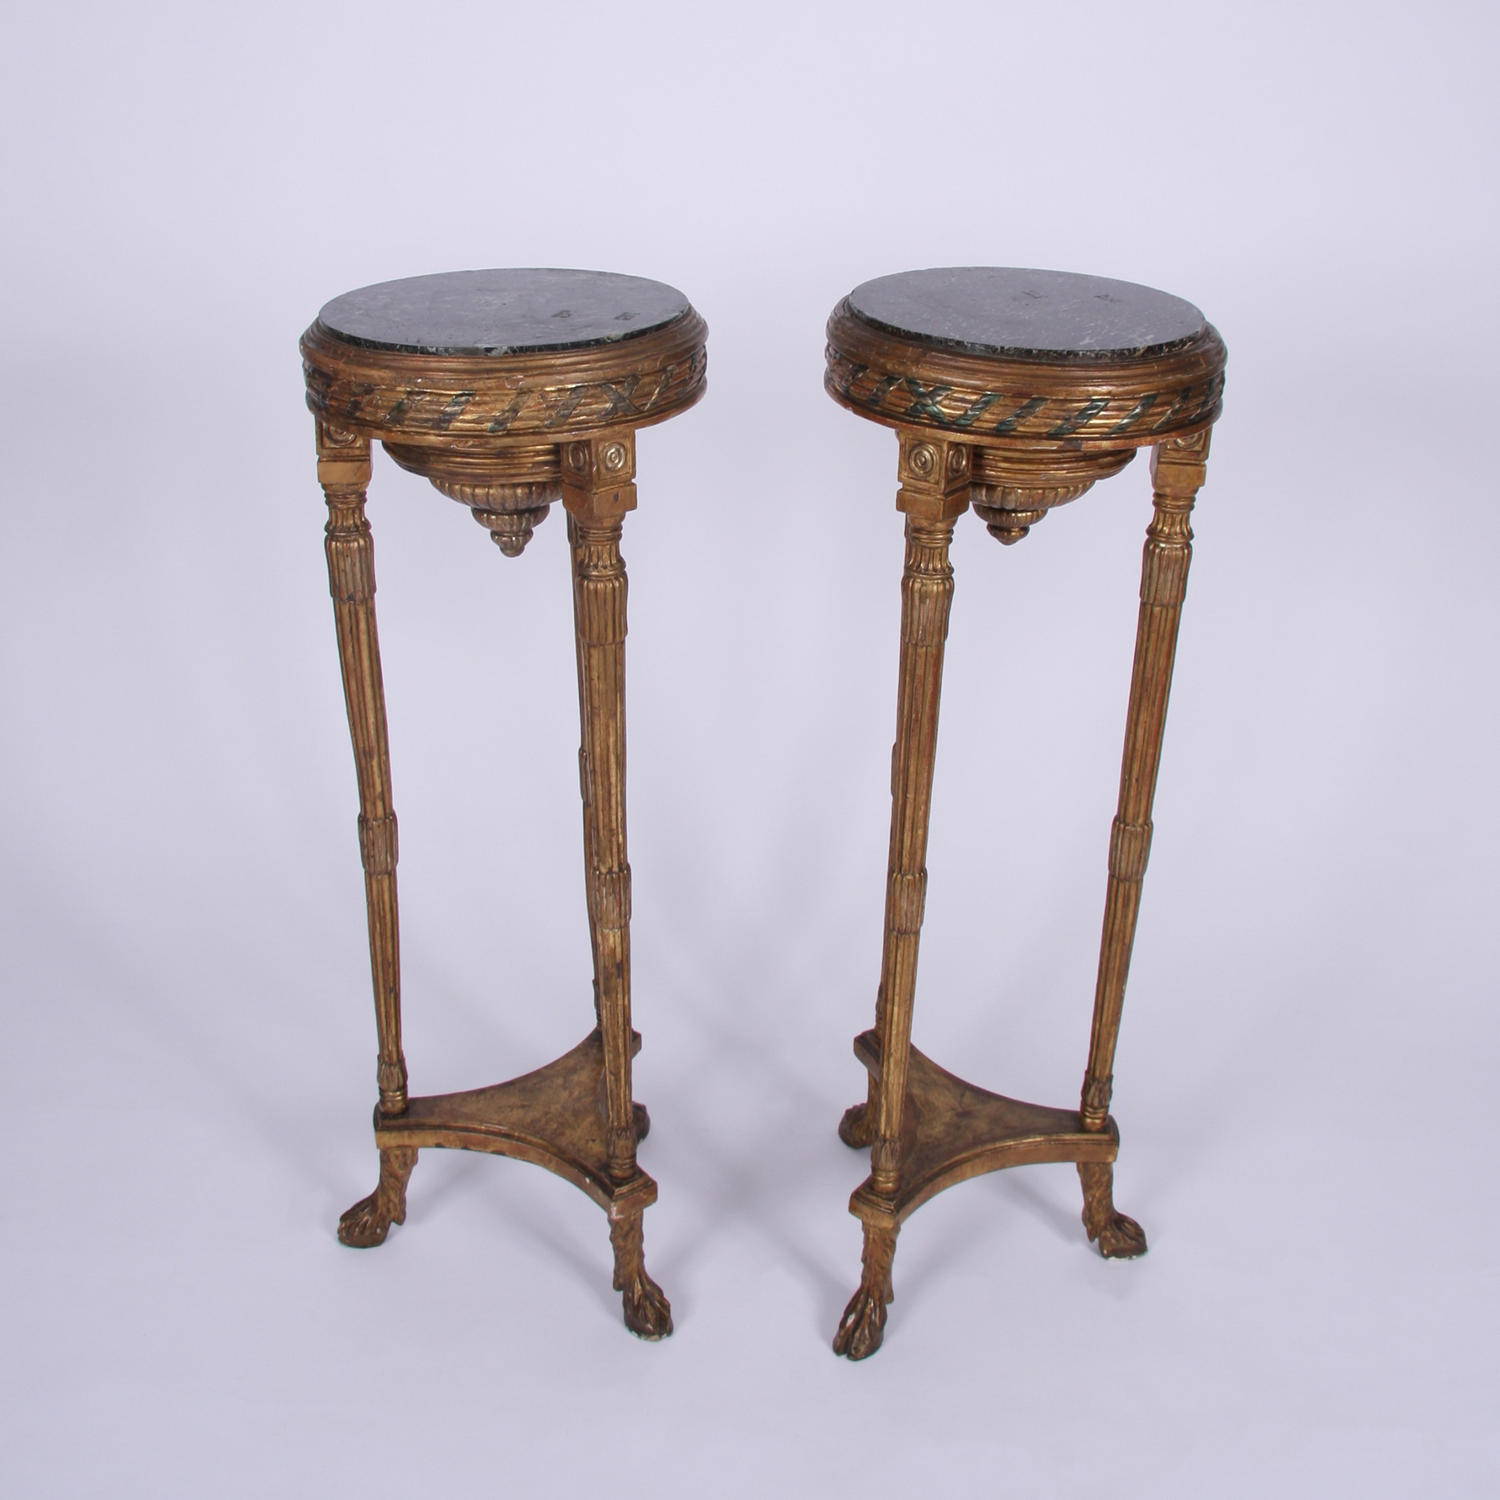 Pair of Tall Giltwood Tables